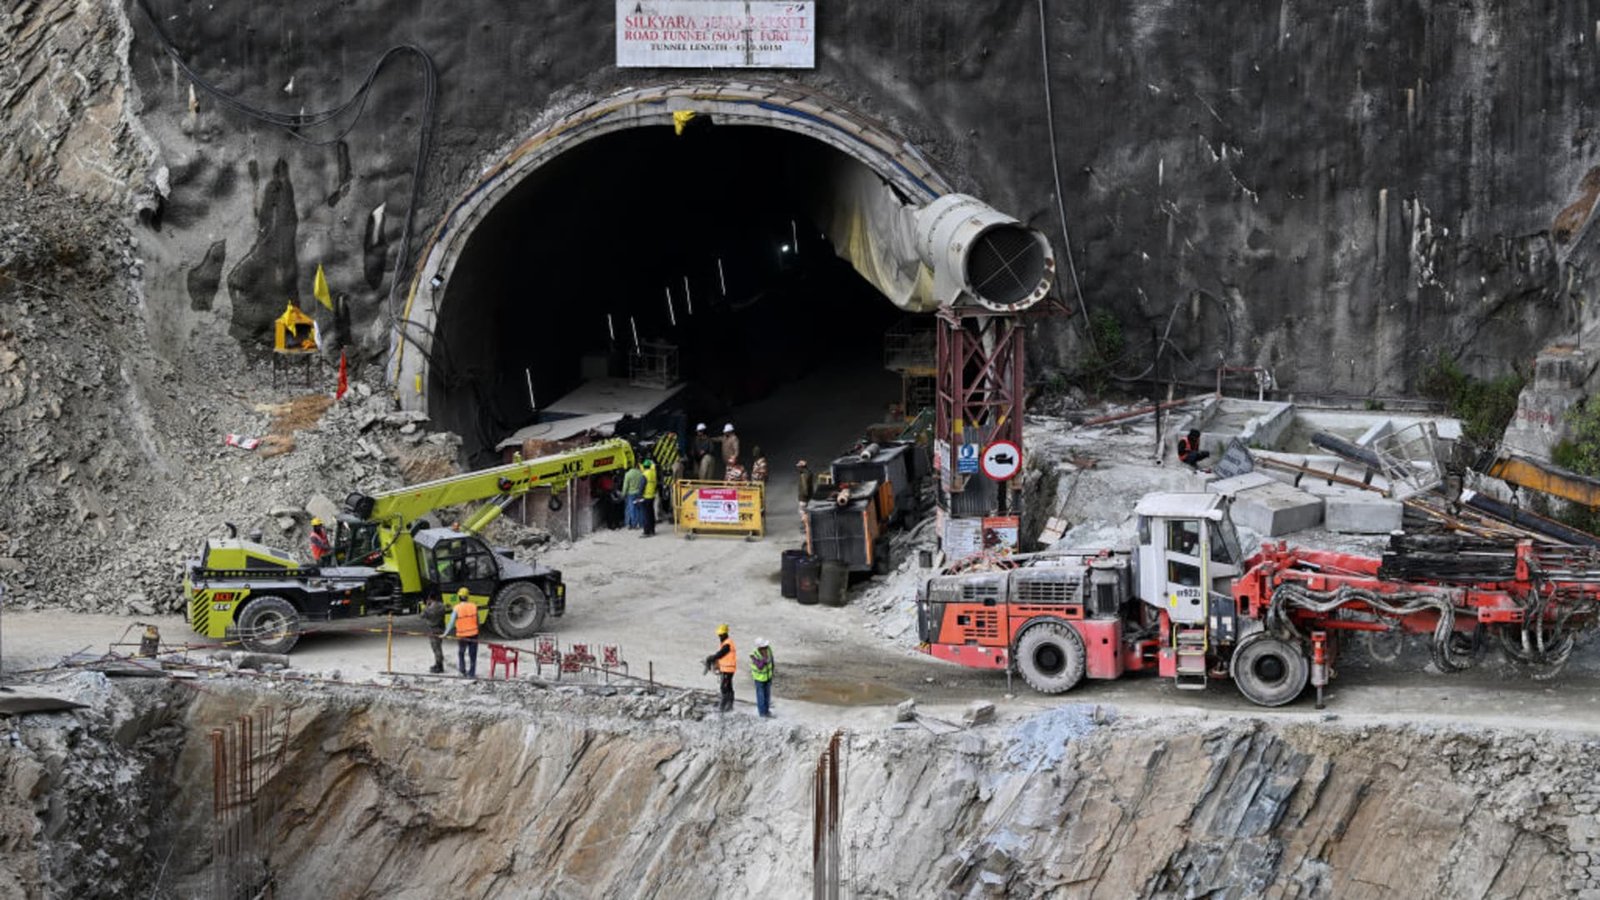 Indian Rescuers Drill Through Debris to Reach 41 Men Trapped in Tunnel